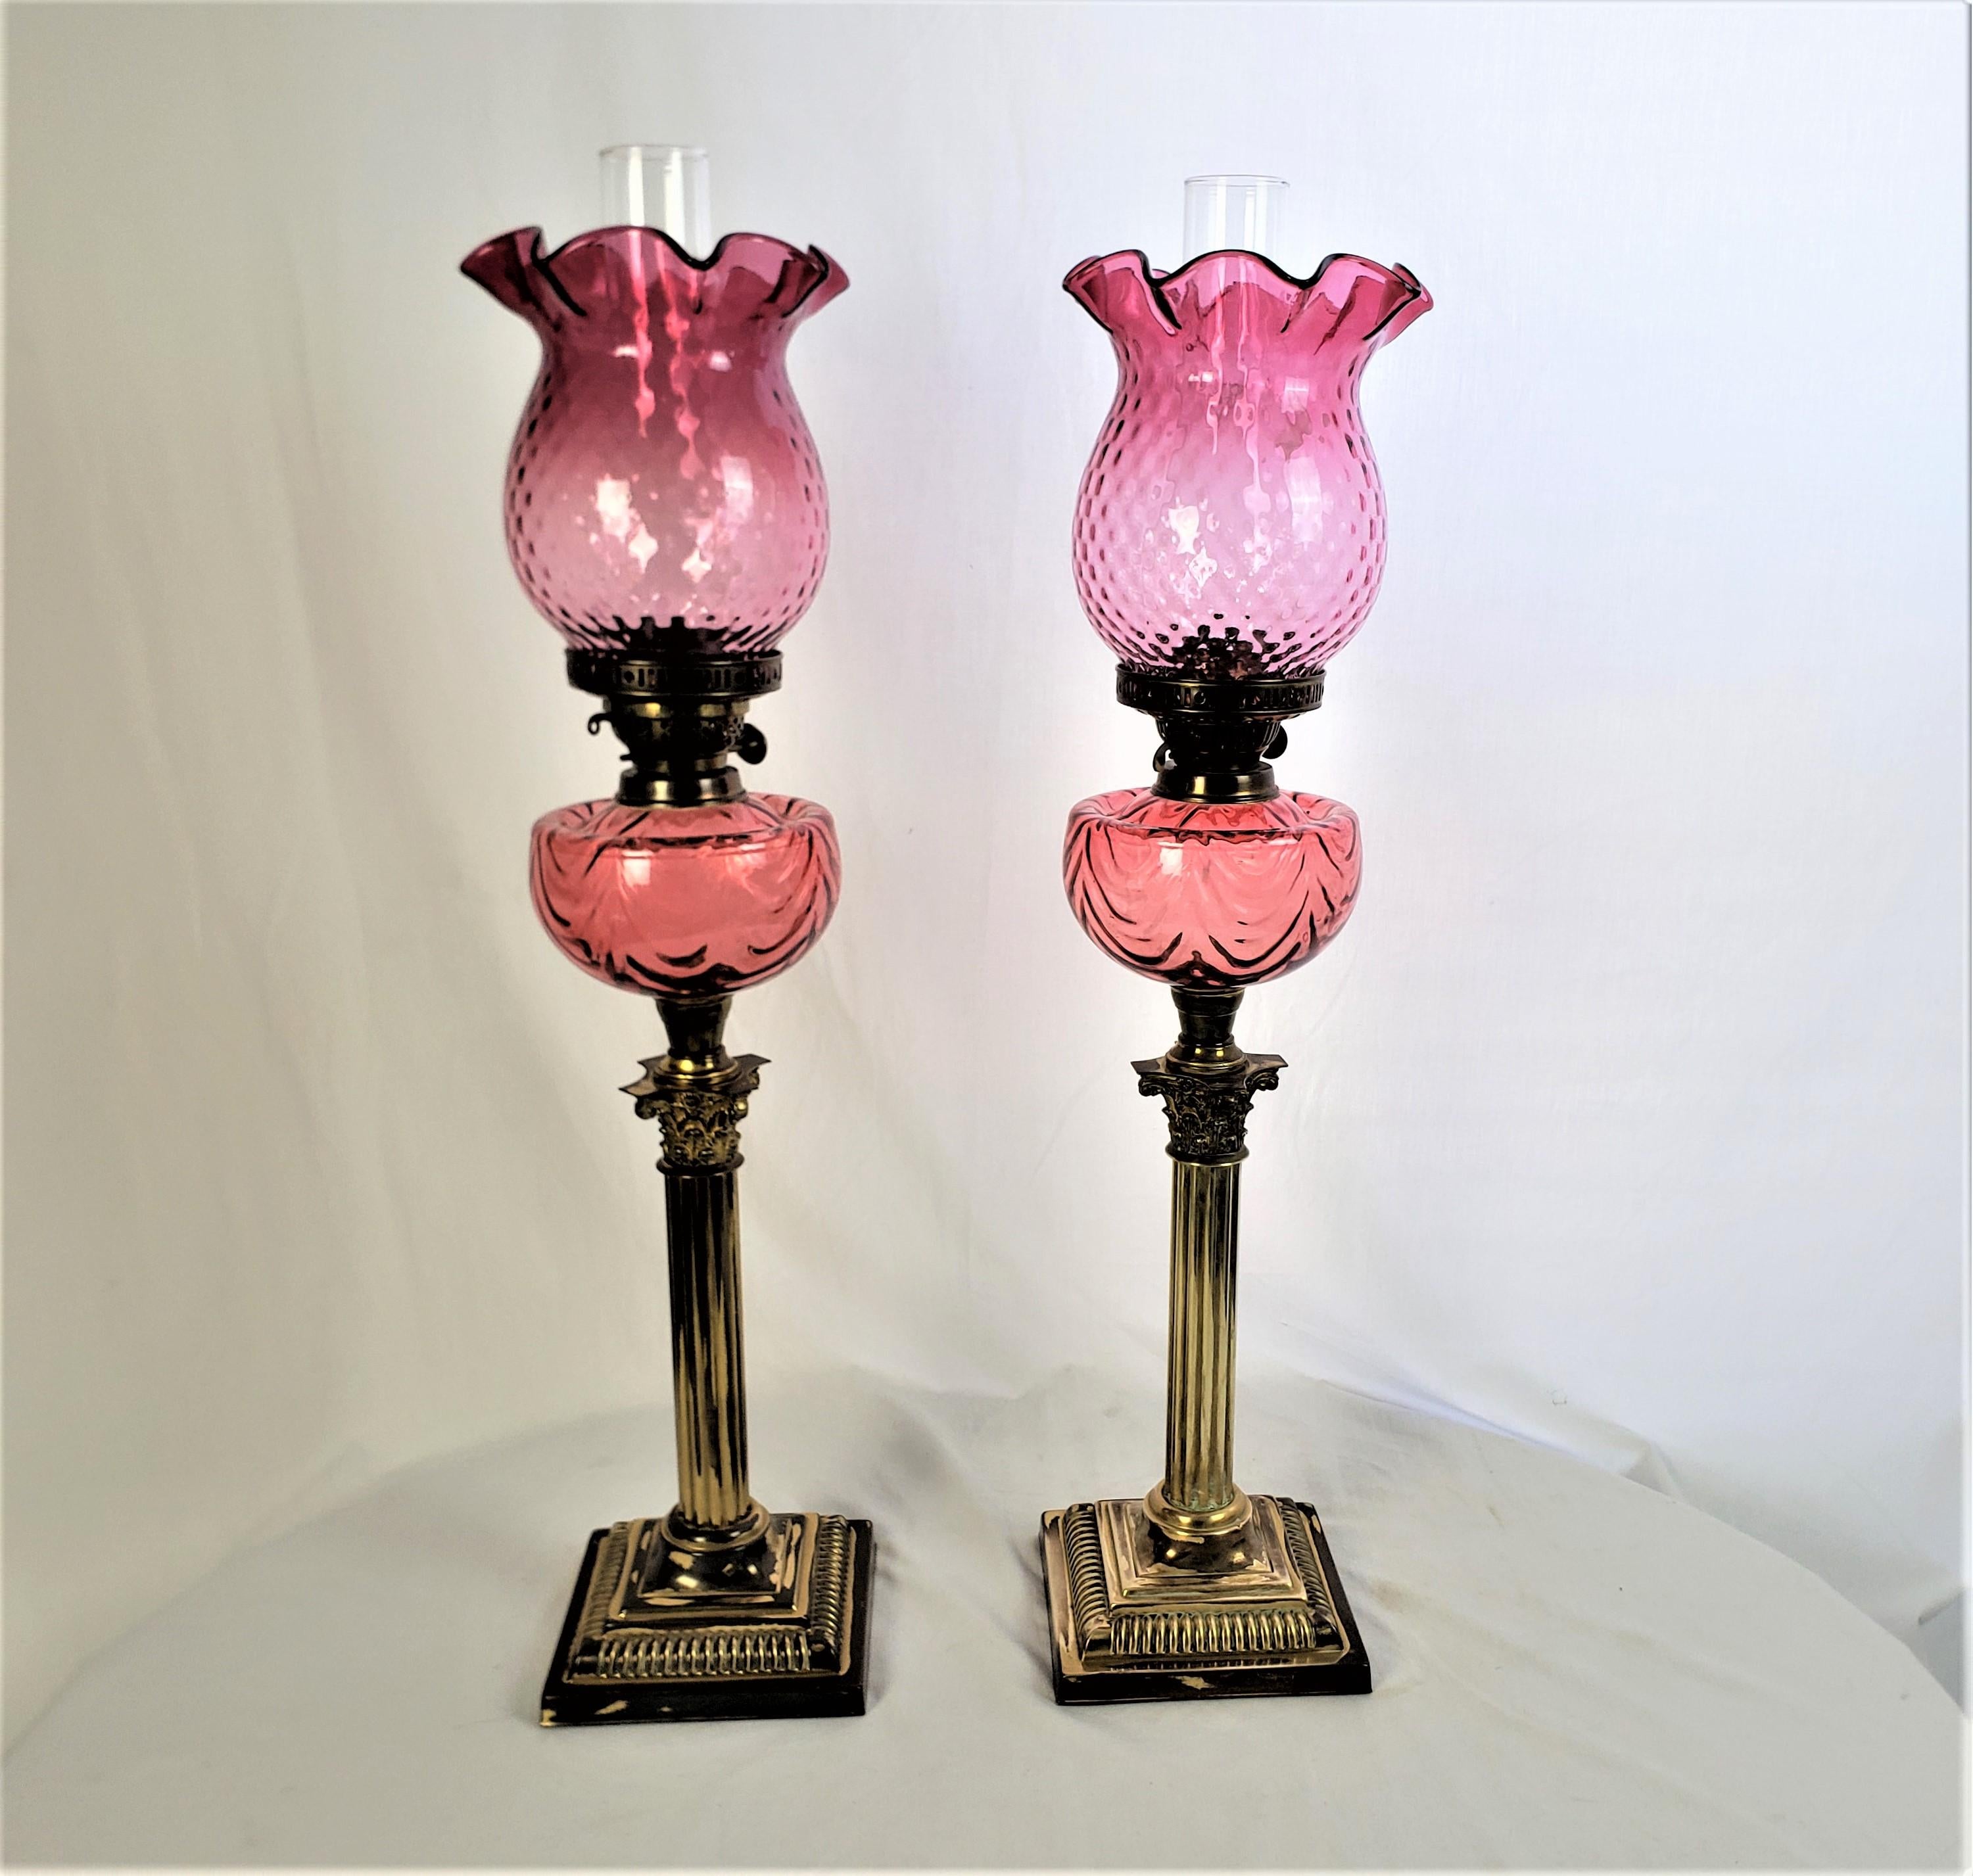 This pair of antique banquet or parlor lamps likely originate from England and date to approximately 1880 and done in the period Victorian style. The lamp bases are done in brass and are done with a Corinthian column style. The outer shade is done